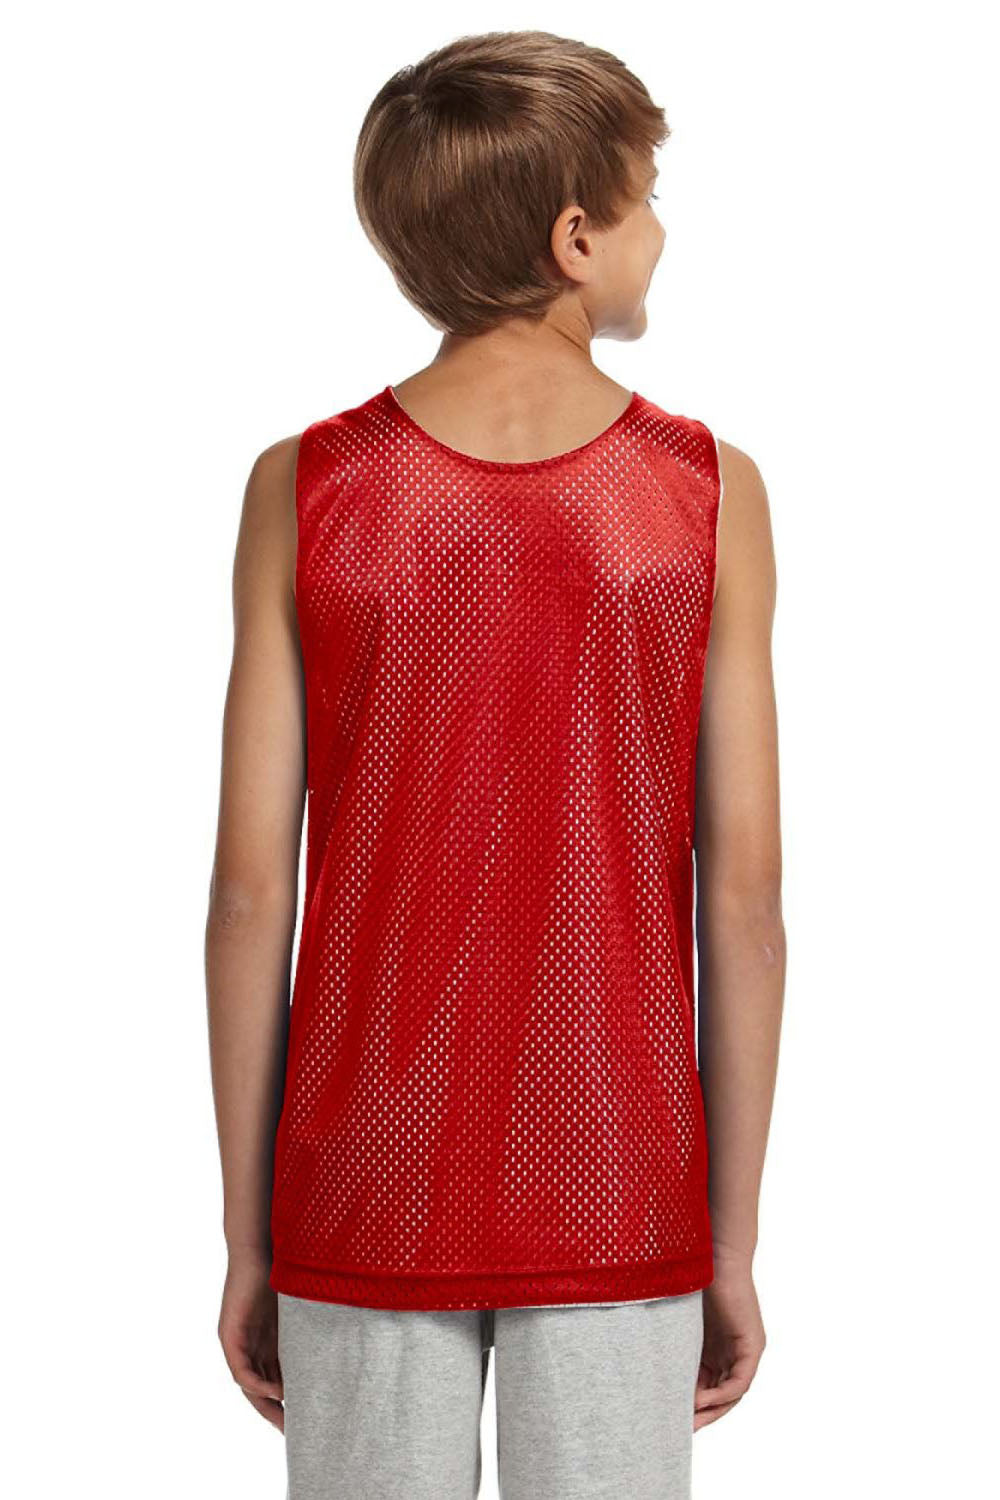 A4 N2206 Youth Reversible Moisture Wicking Mesh Tank Top Scarlet Red/White Model Back